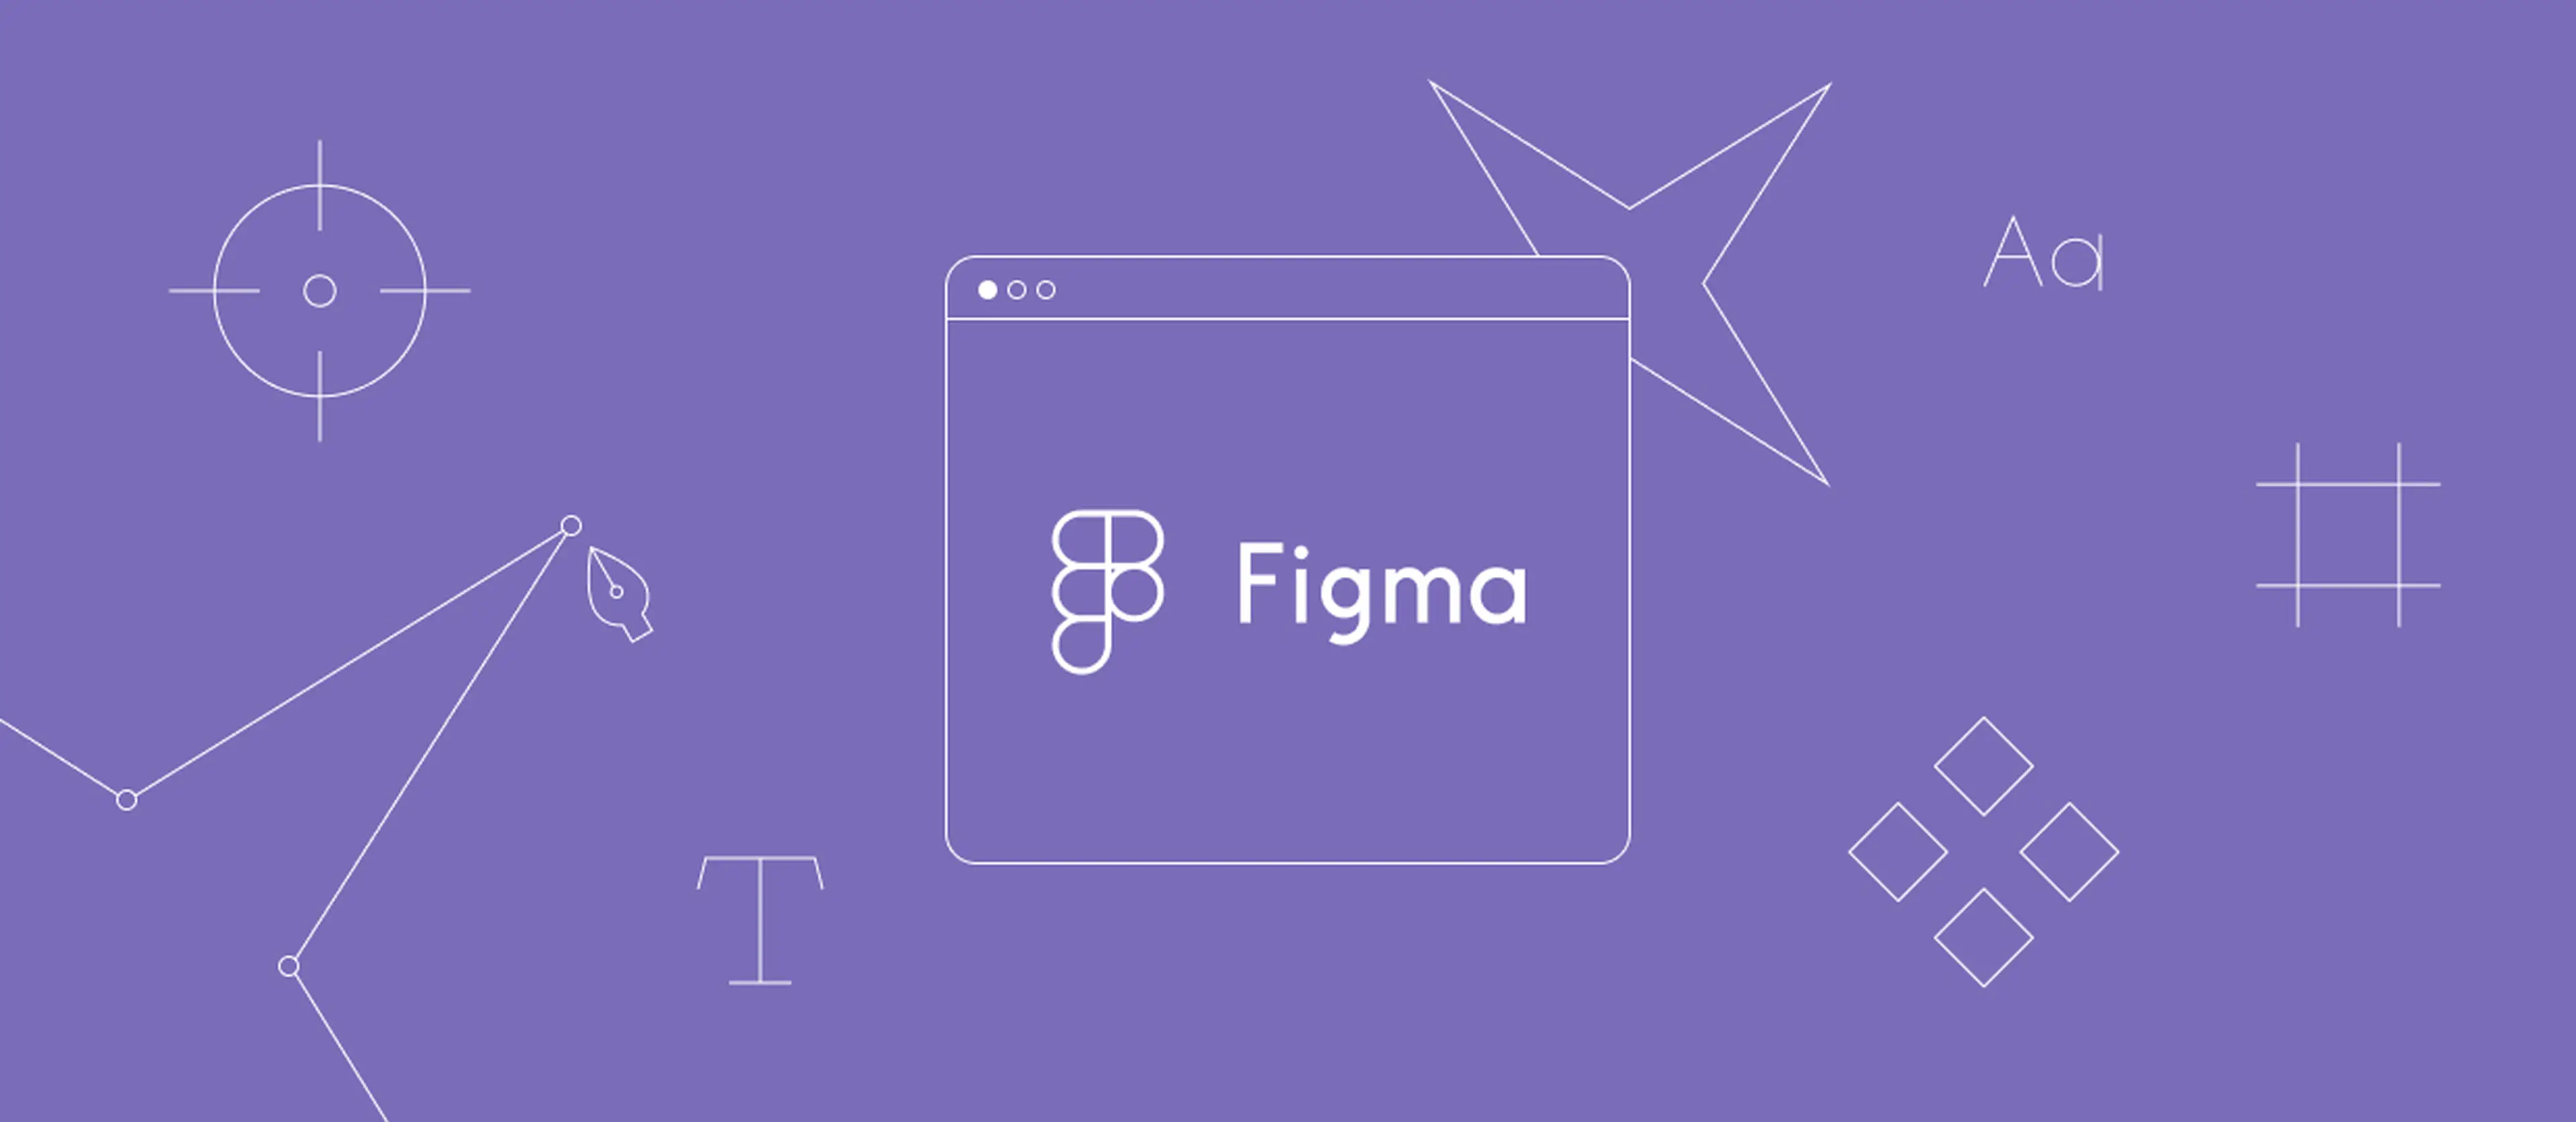 A purple graphic with designs that says Figma 